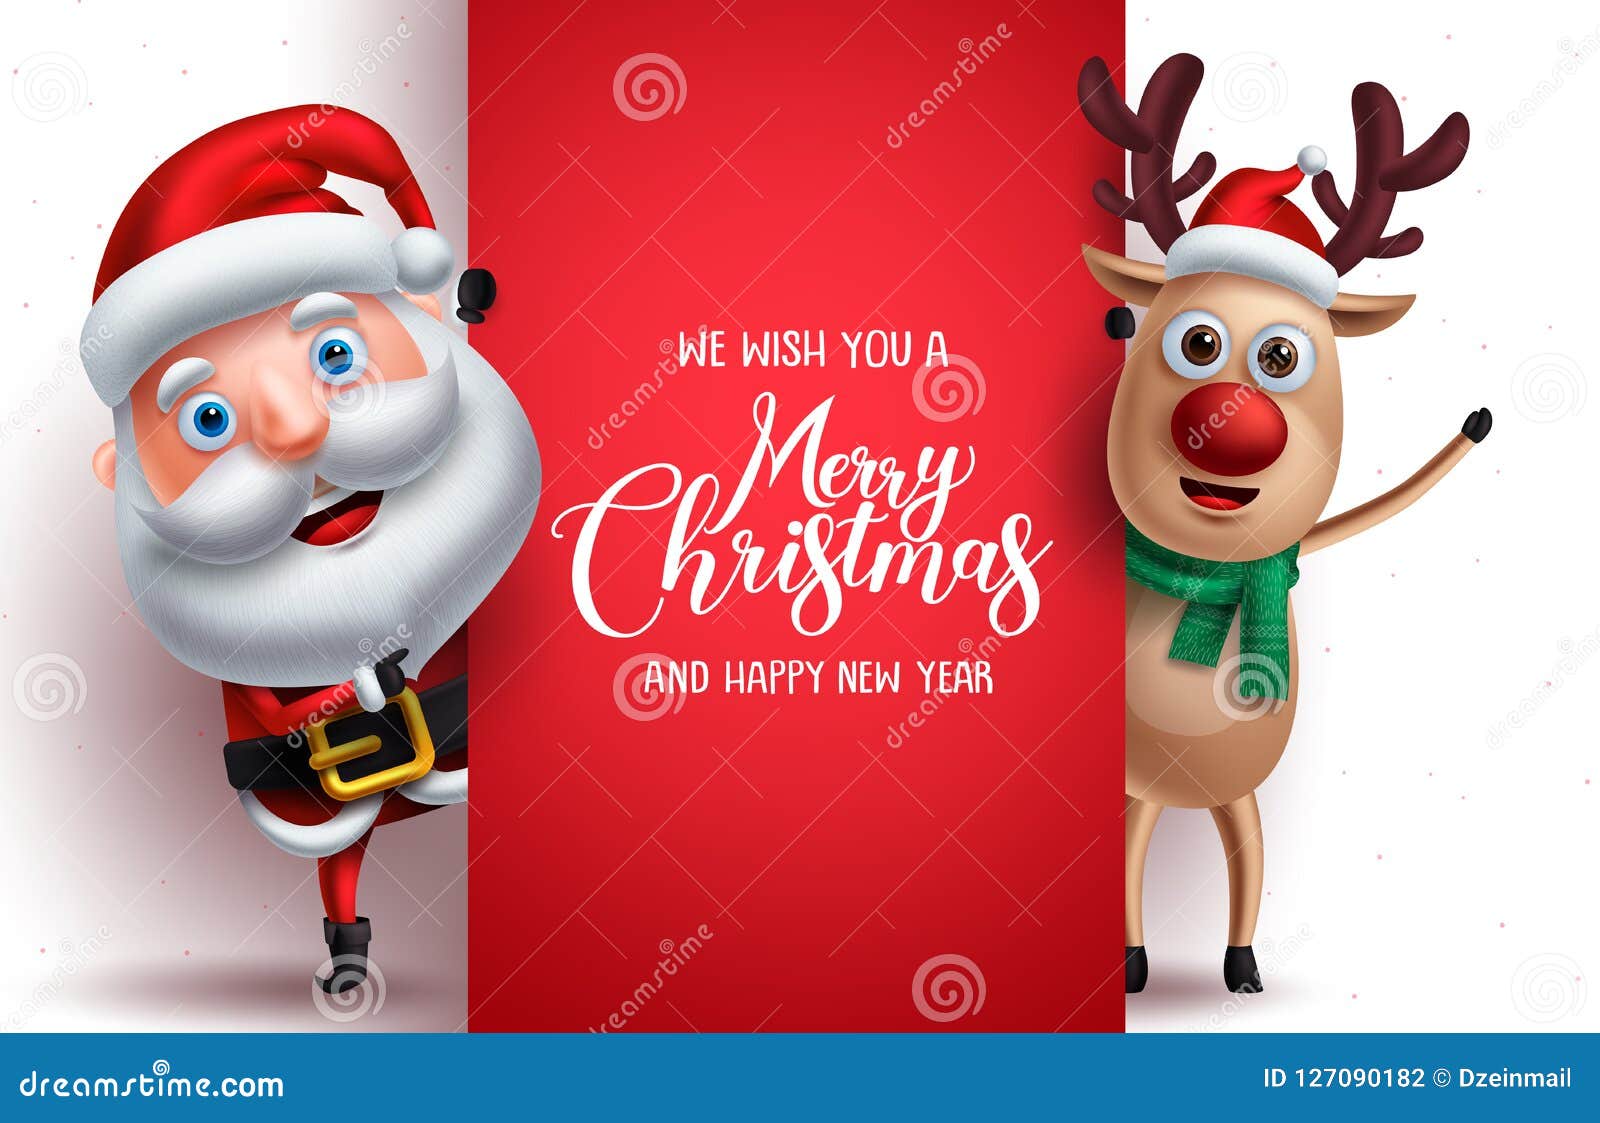 santa claus and reindeer  christmas characters holding a board